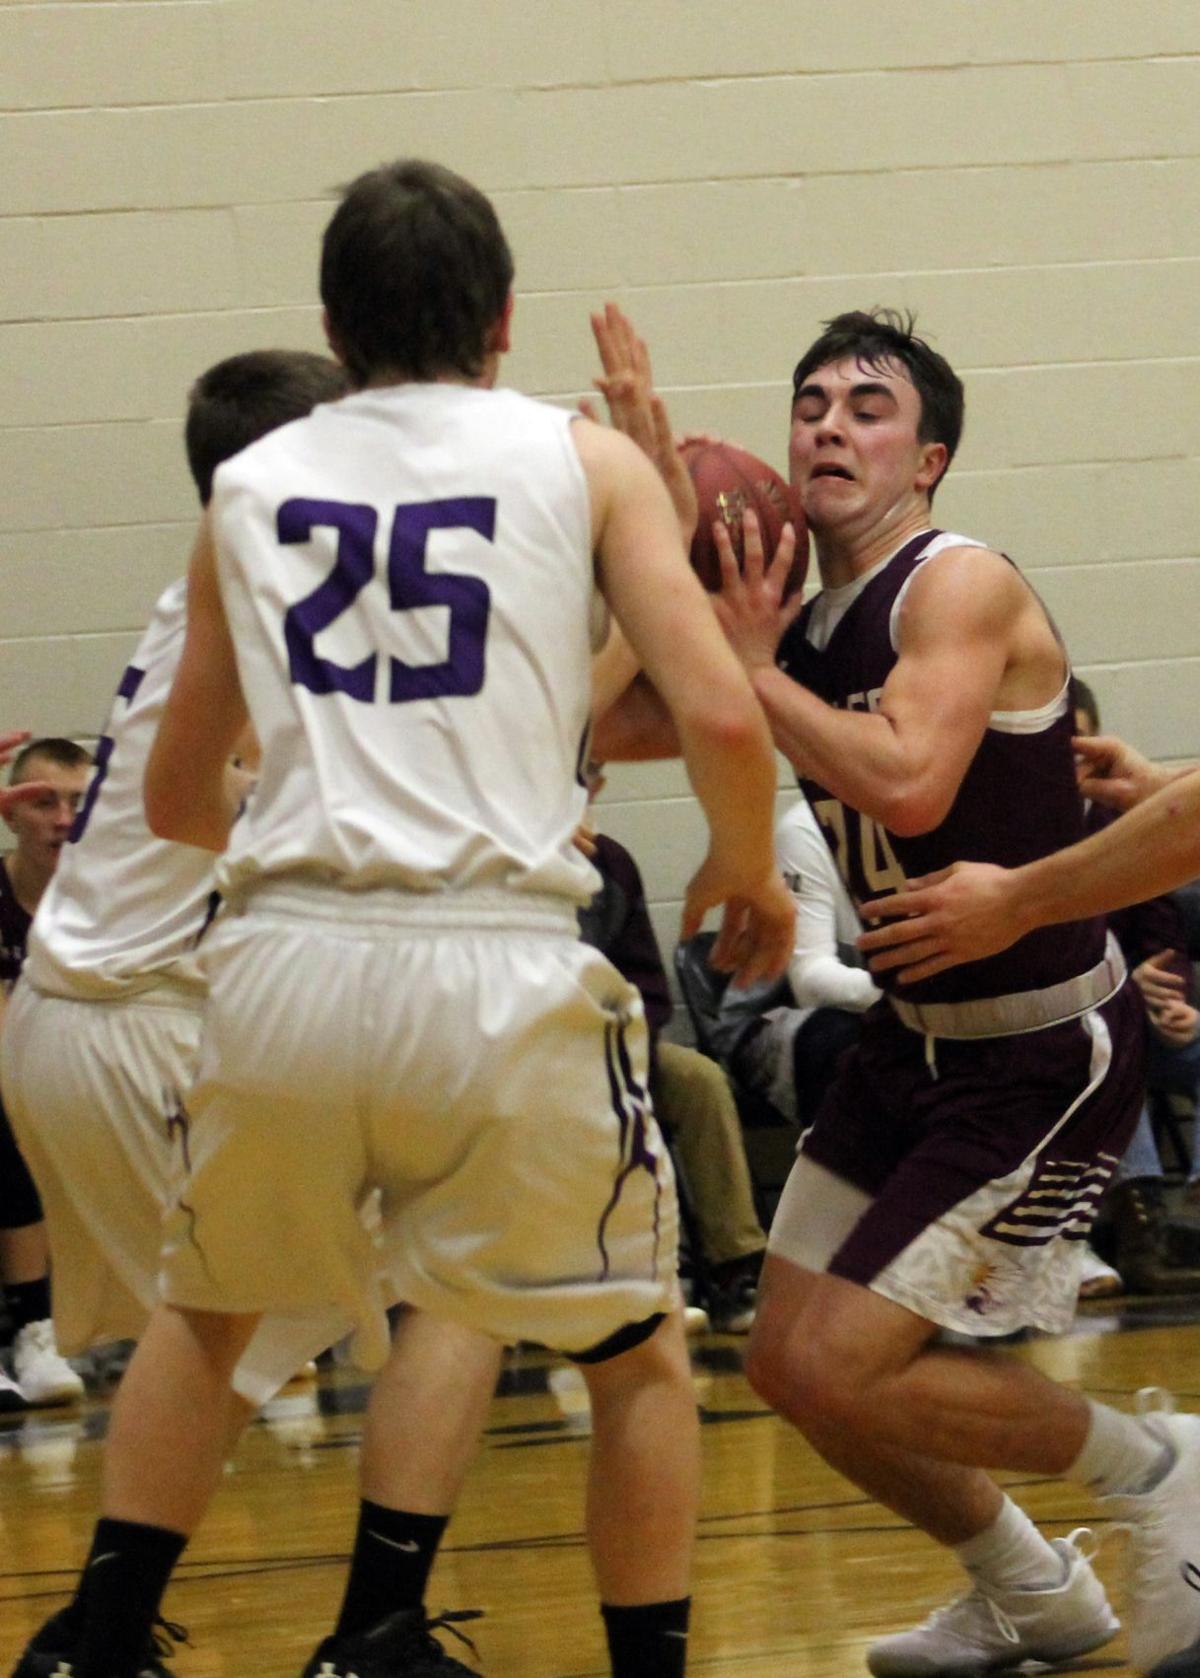 Bench gives a boost as Ellicottville beats Pine Valley ...